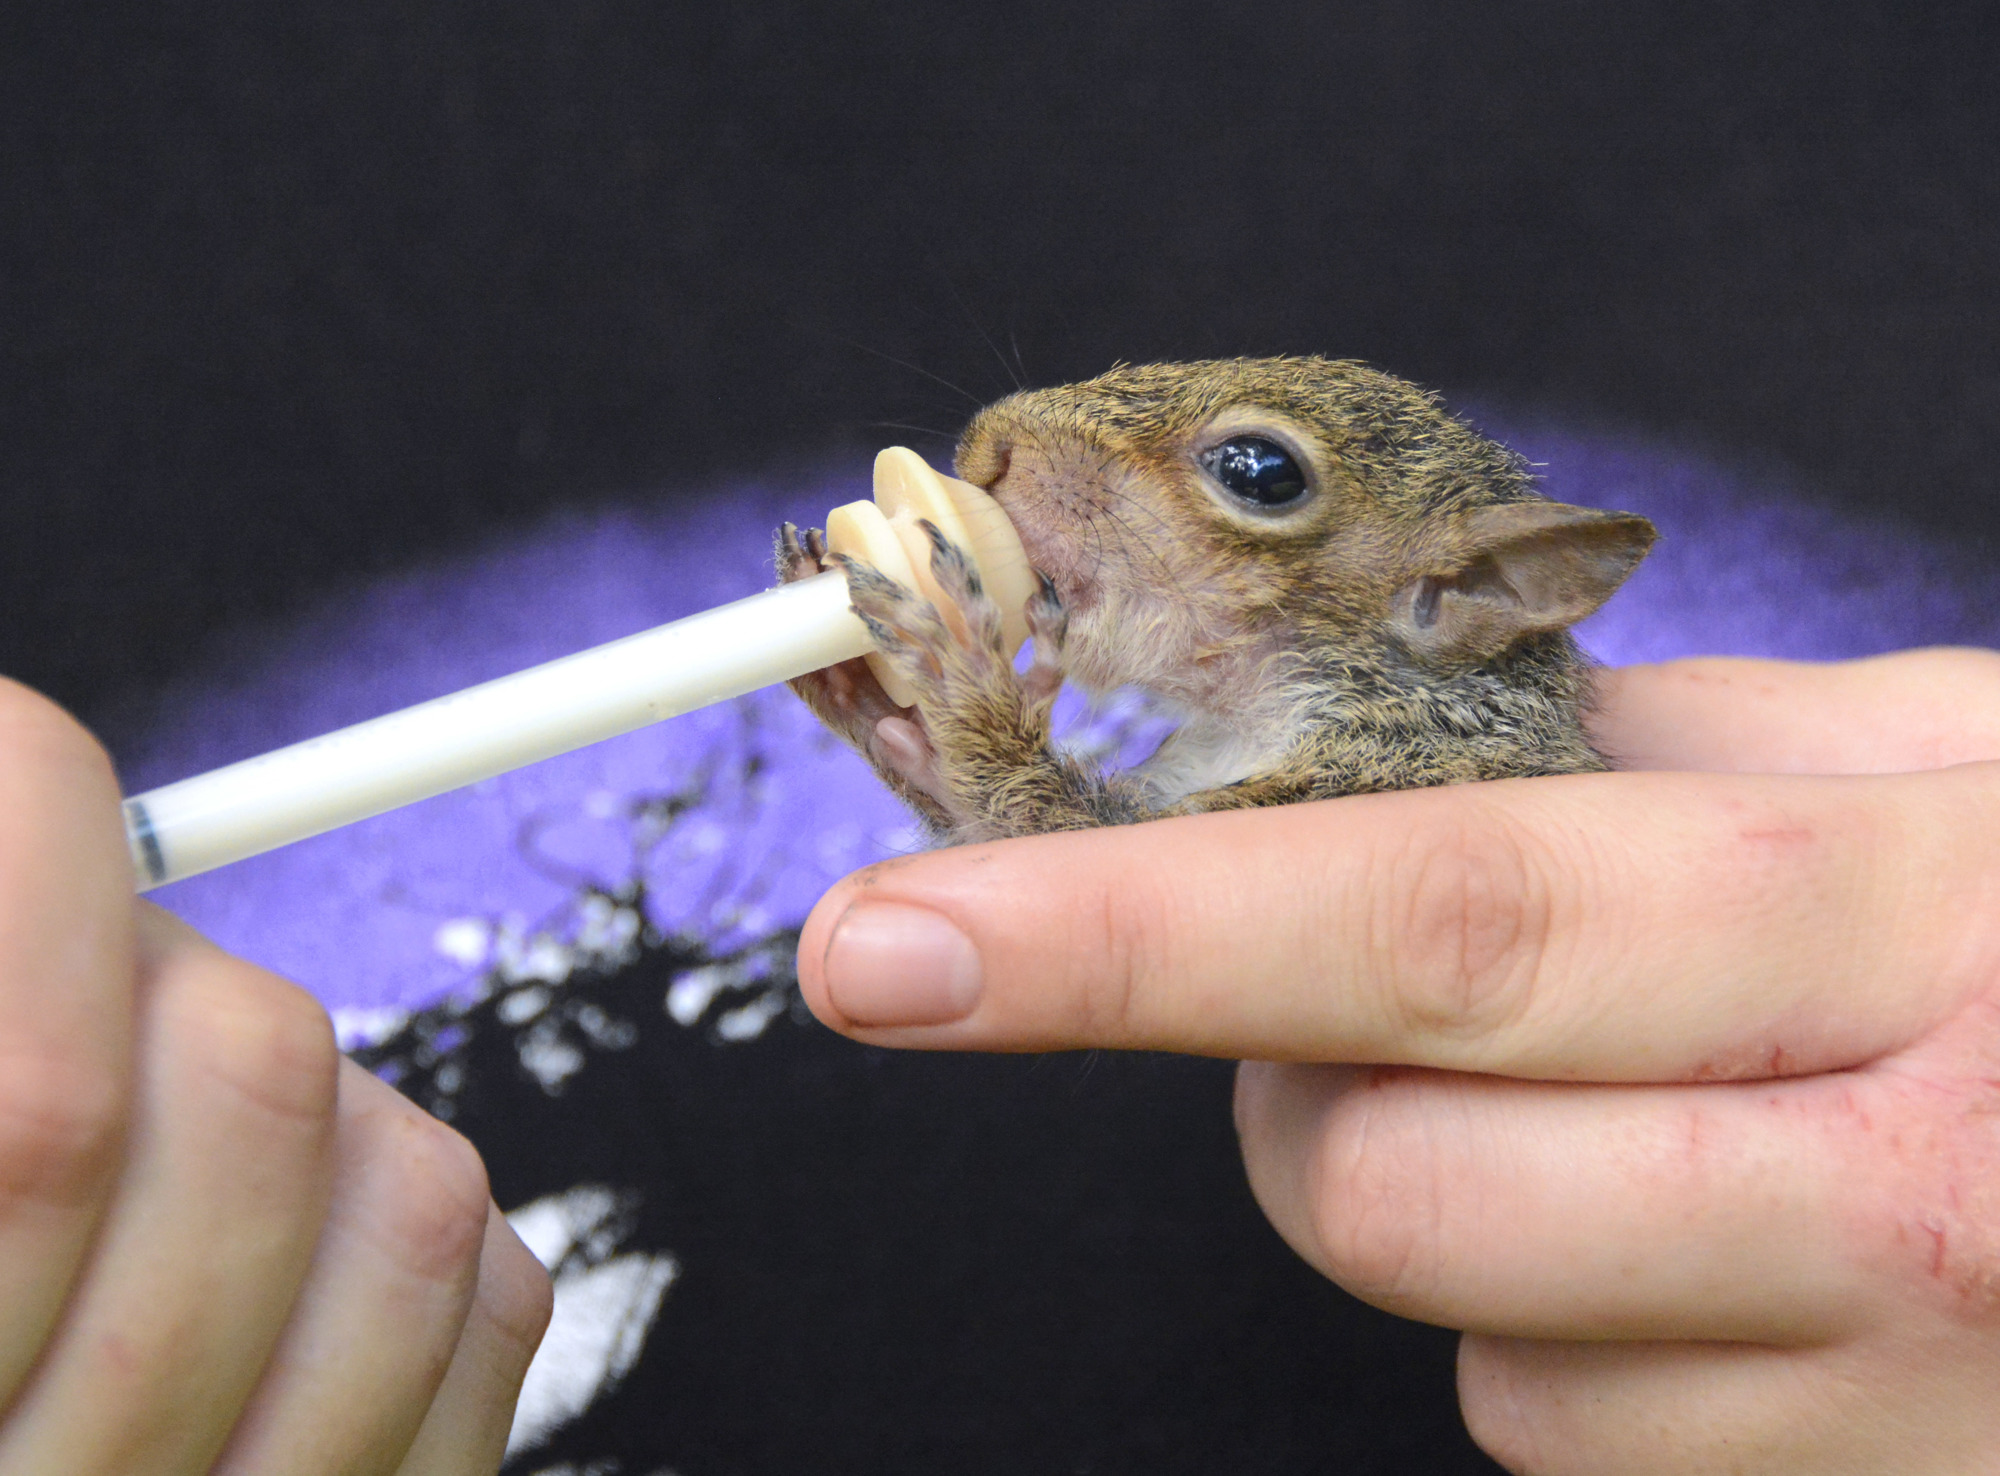 Squirrels are fed by hand at first but receive less attention over time so they can be released into the wild.